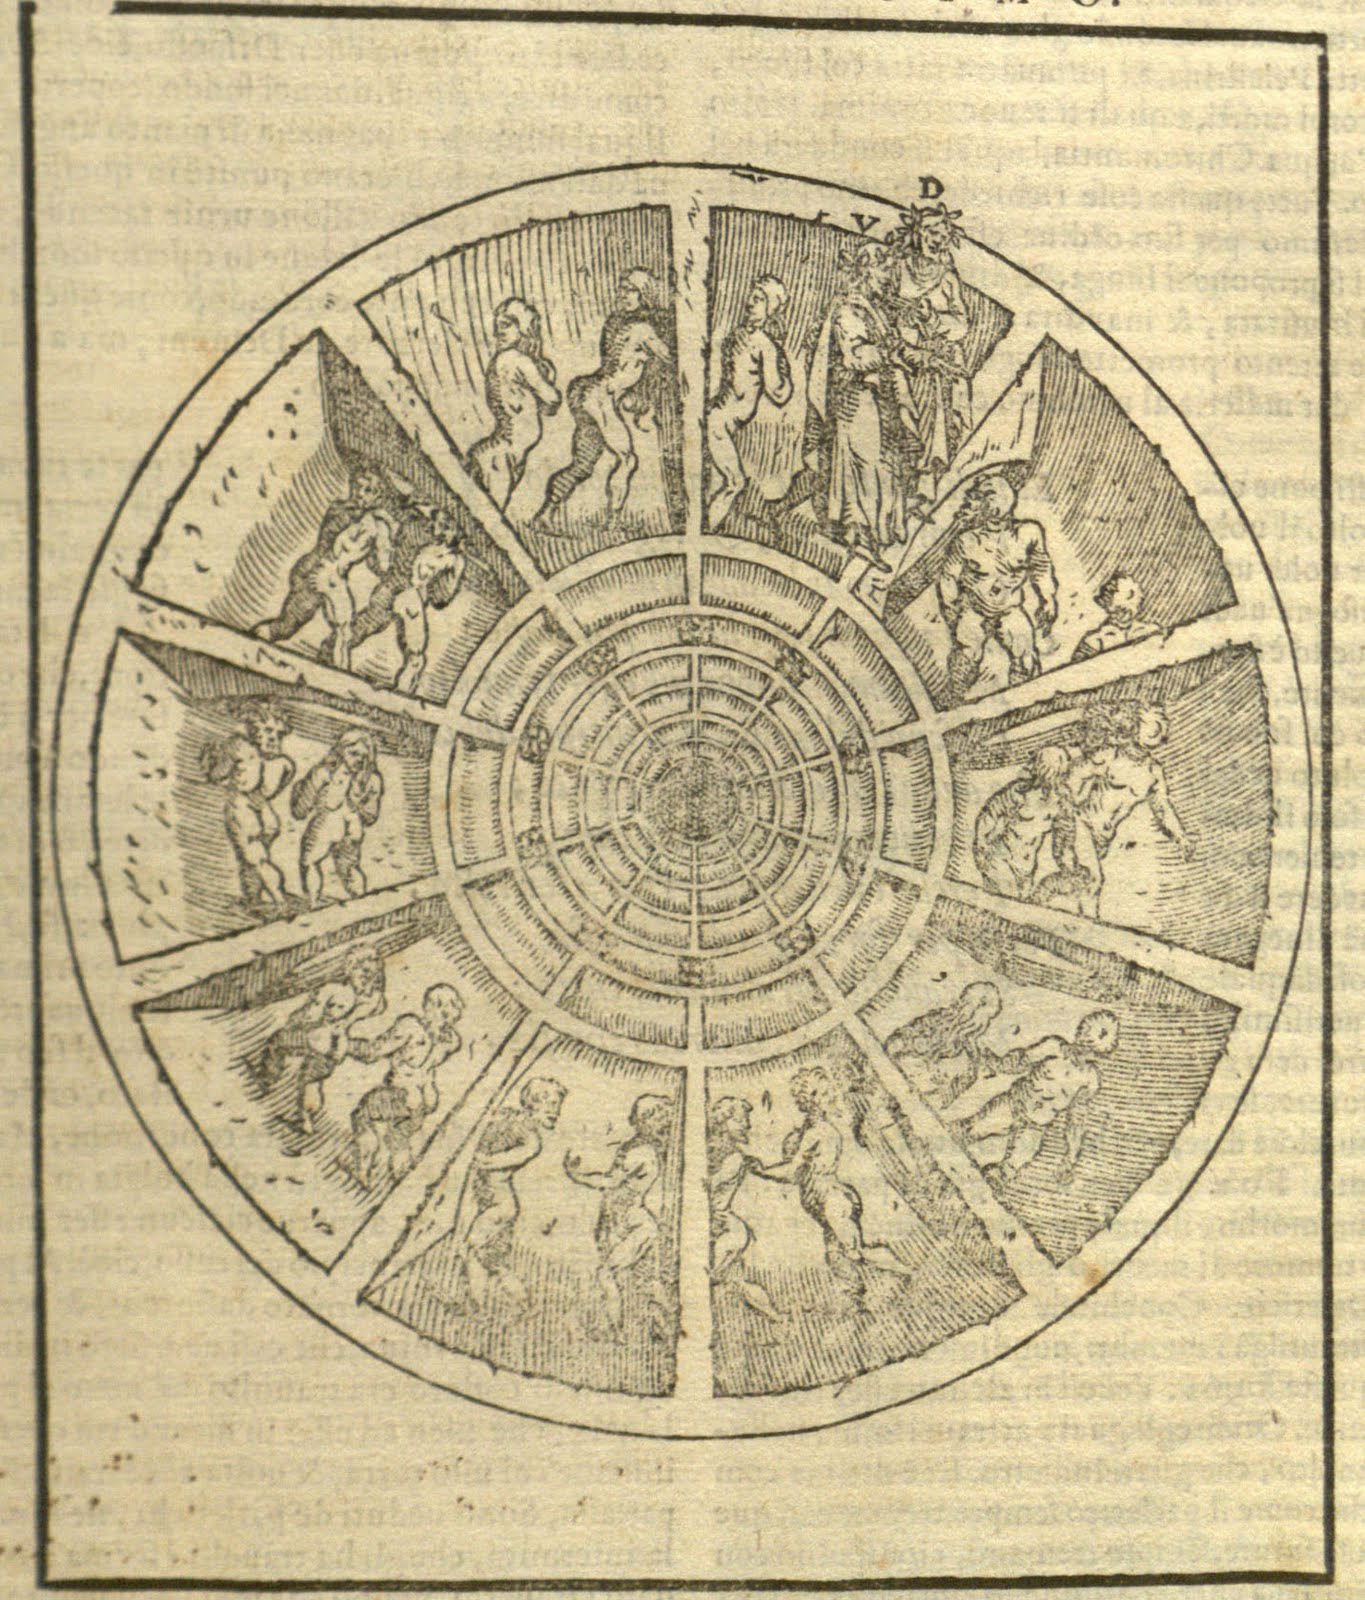 illustration depicting a circle divided into 10 compartments, each containing human figures.